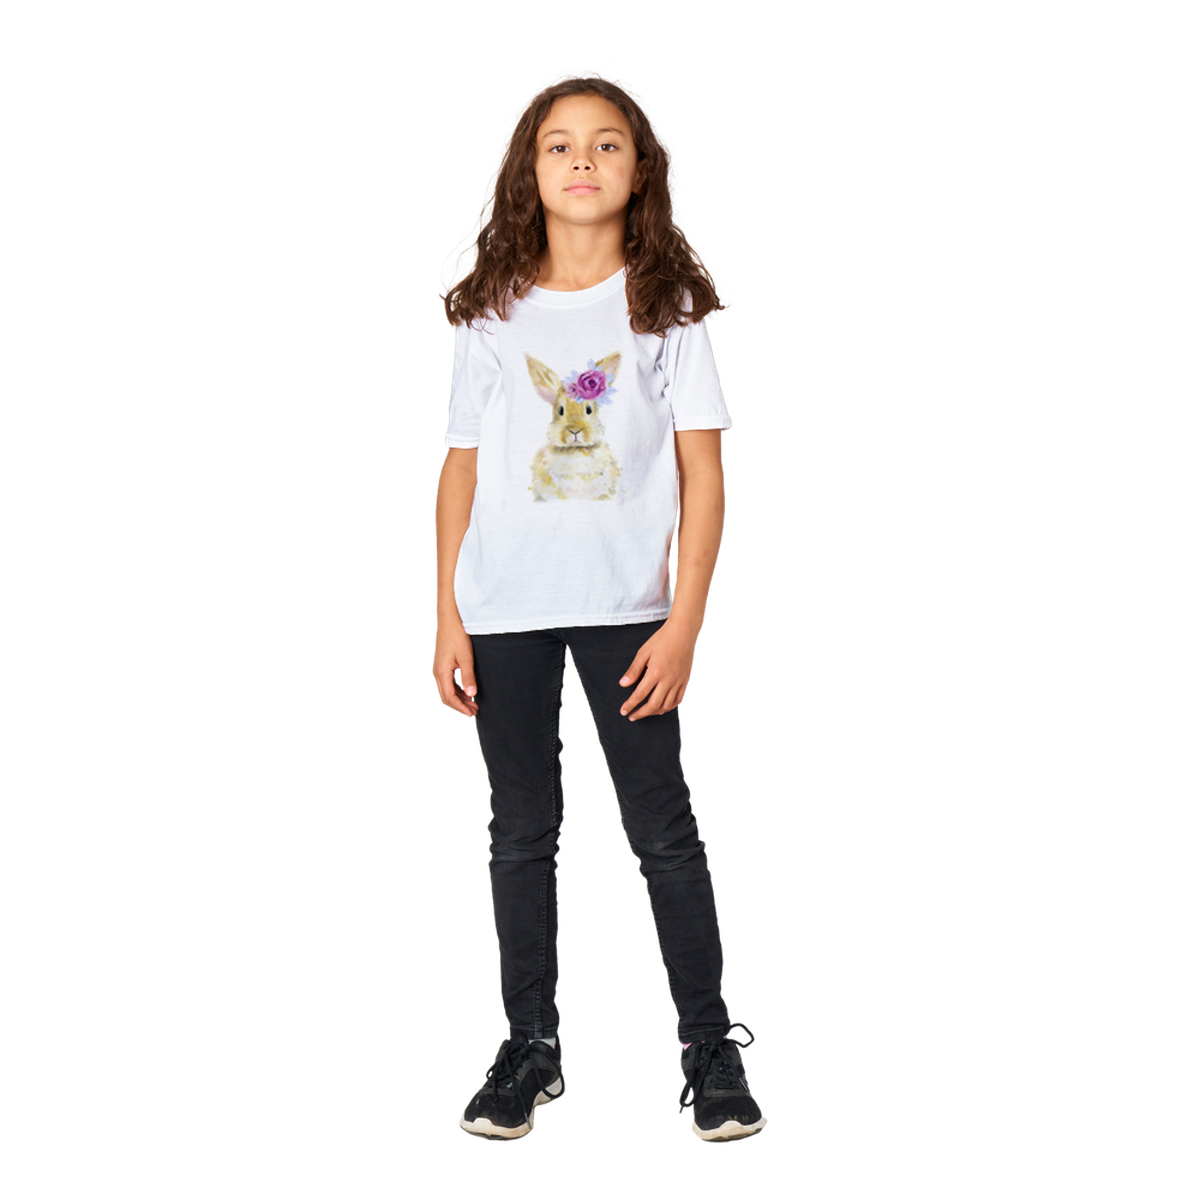 When Some Bunny Loves You Classic Kids Crewneck T-shirt